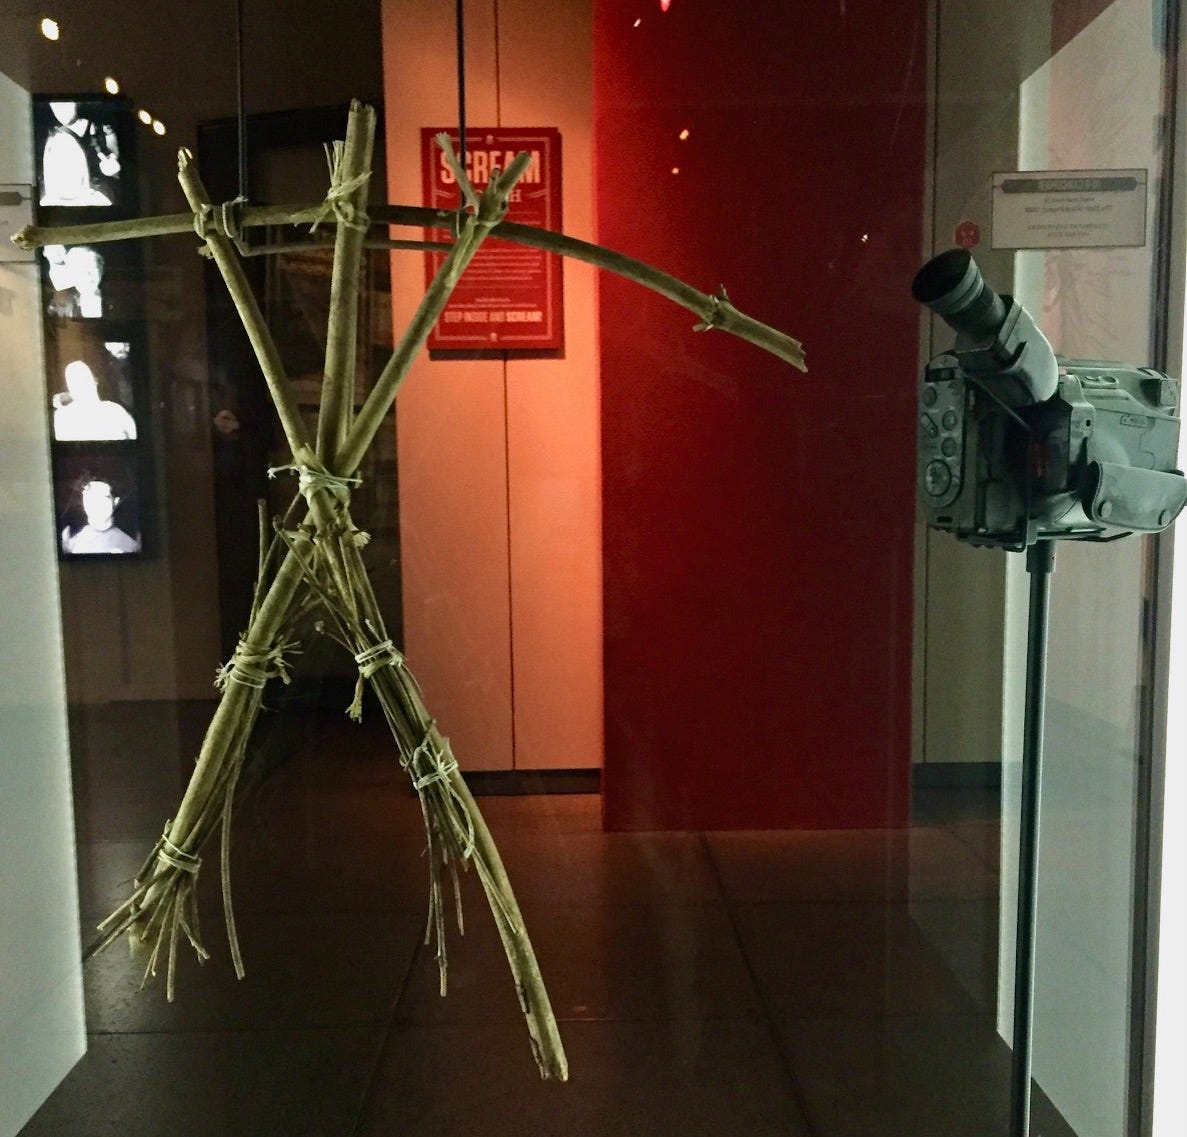 The iconic Blair Witch stick figure prop on display beside a video camera